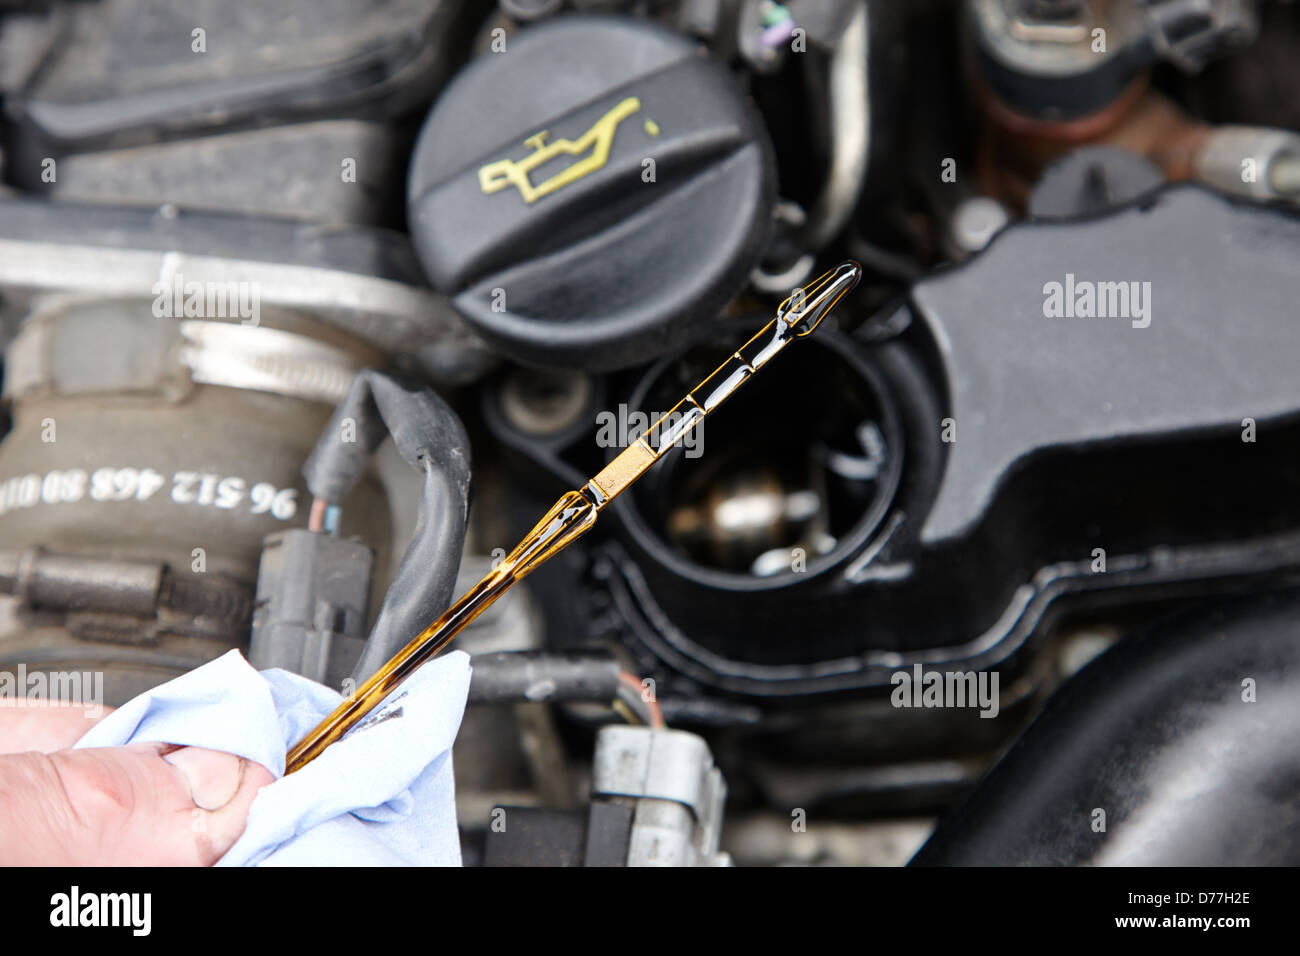 checking the oil level on the dipstick in a car engine compartment Stock Photo